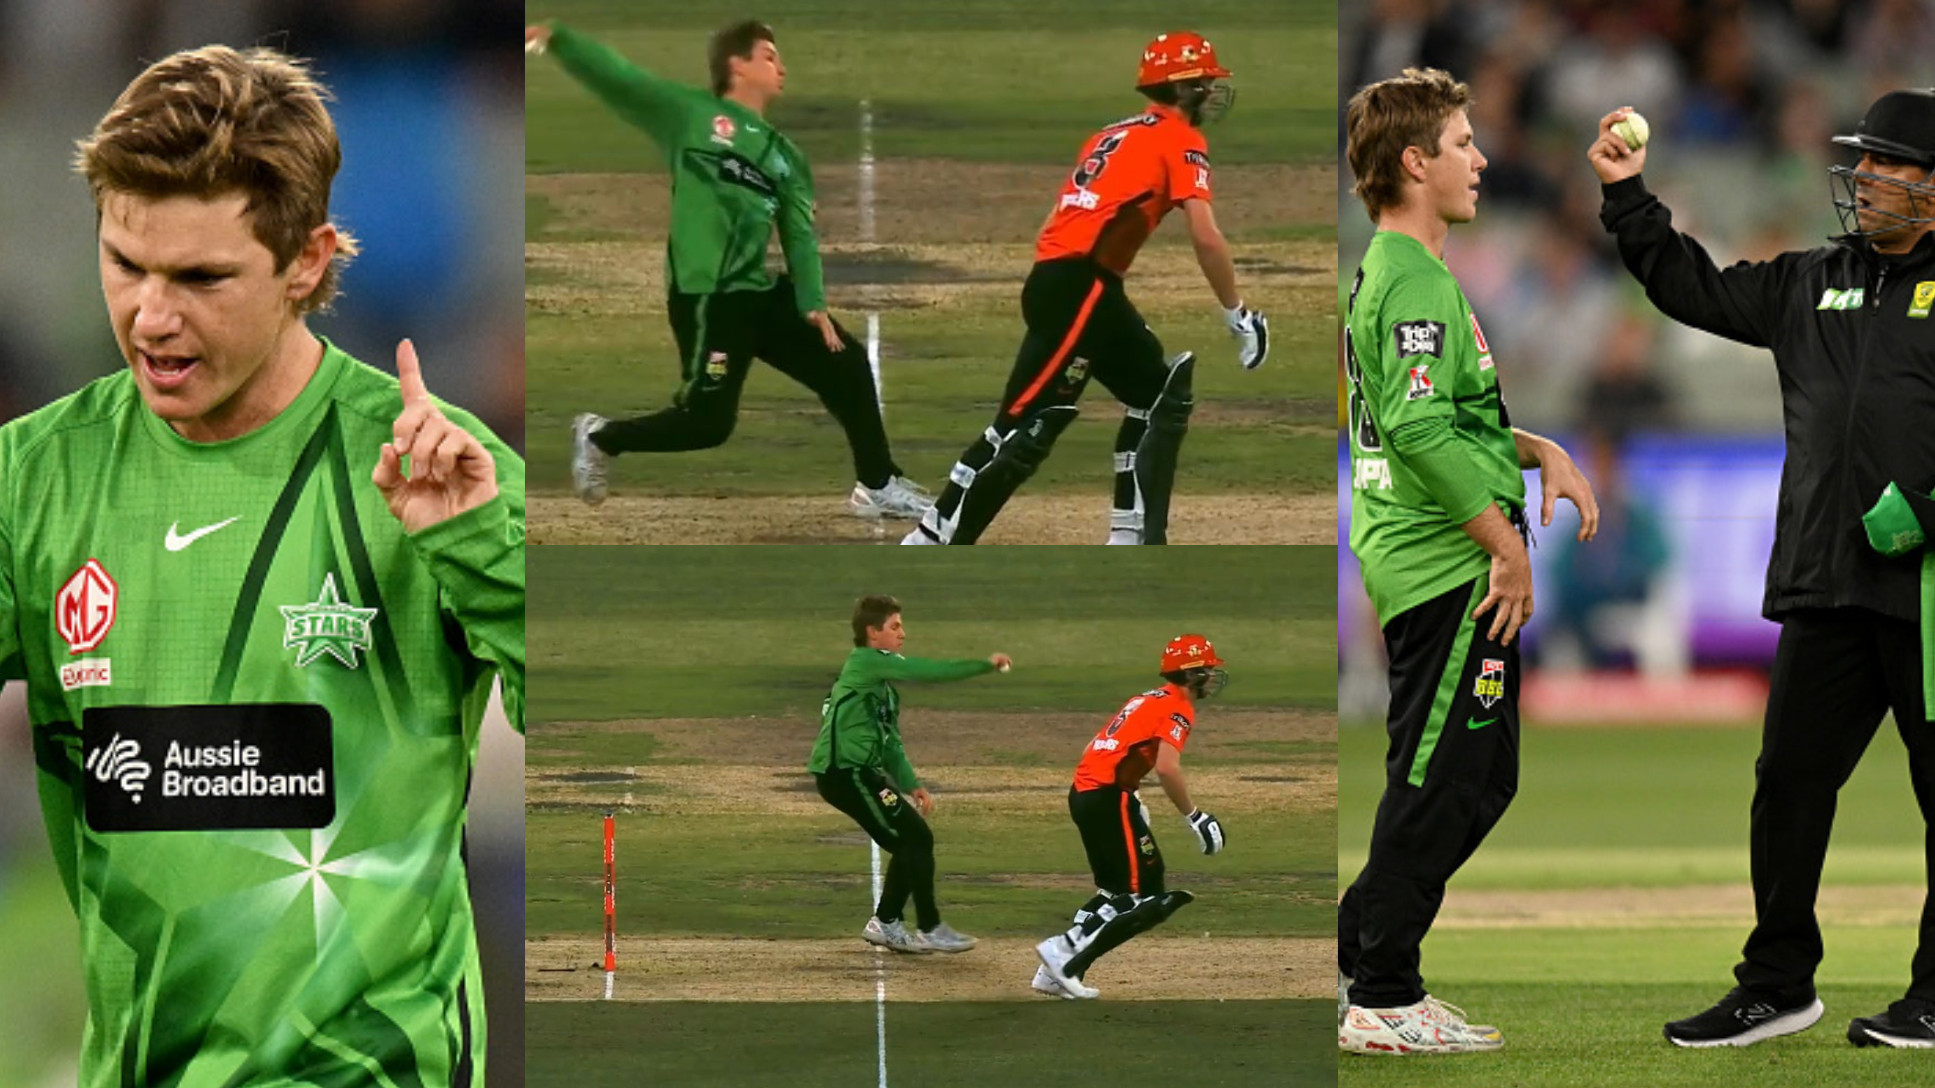 BBL 12: WATCH- Adam Zampa’s run-out attempt at non-striker’s end deemed not out due to rules